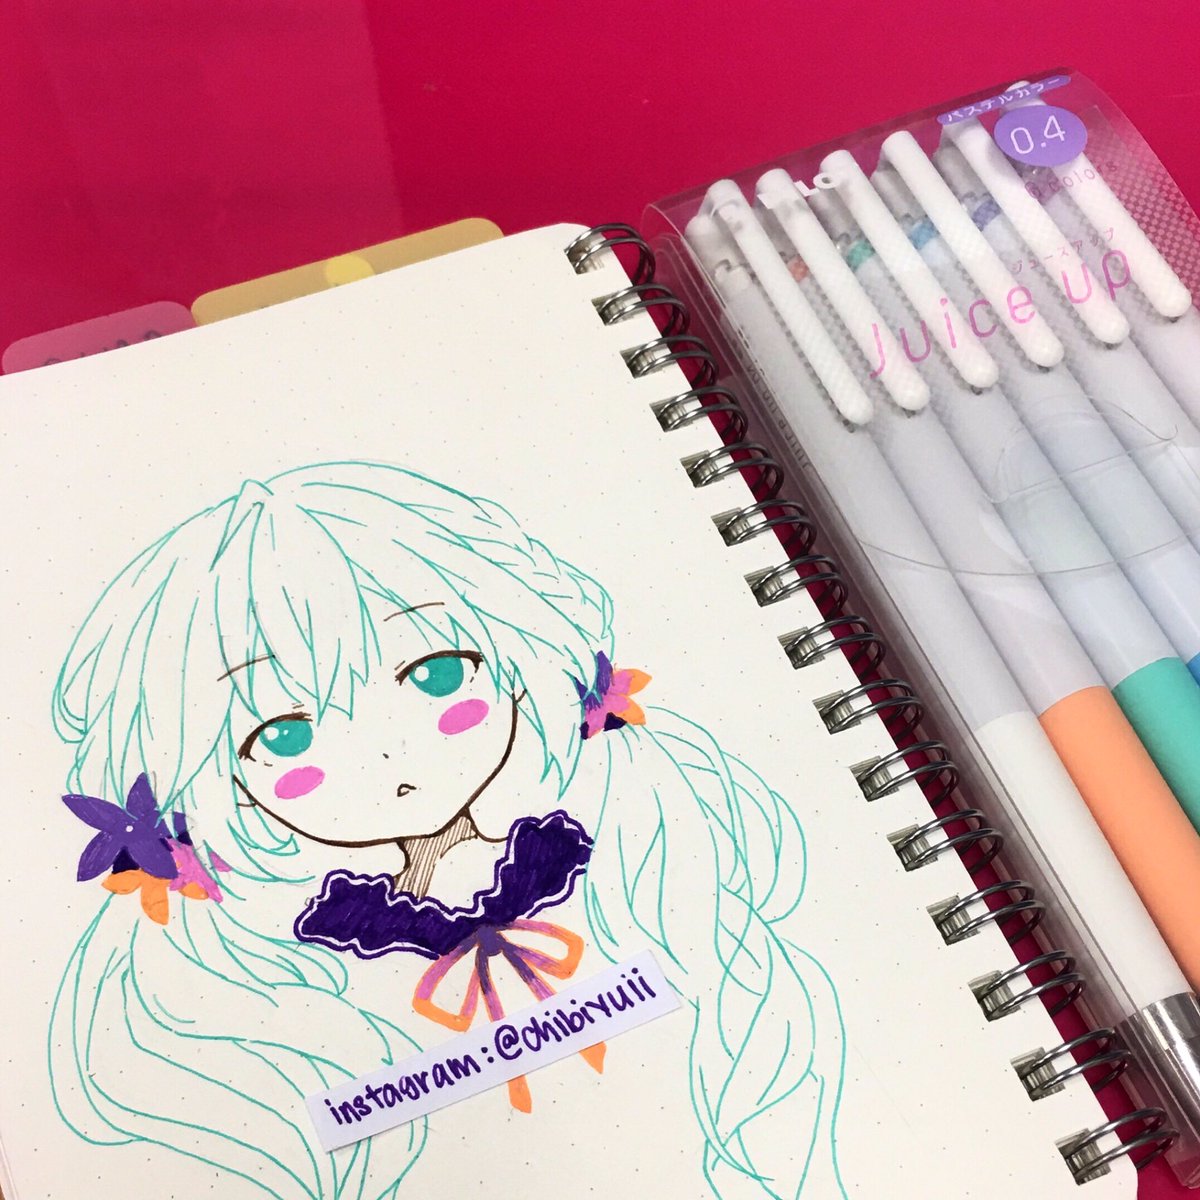 I’ve always loved Date A Live and i’m glad it came back with a Season III. Trying my new pens on Natsumi (๑˃̵ᴗ˂̵) 
#datealive #datealive3 #datealivenatsumi #anime #fanart #loli #natsumi #juiceuppens